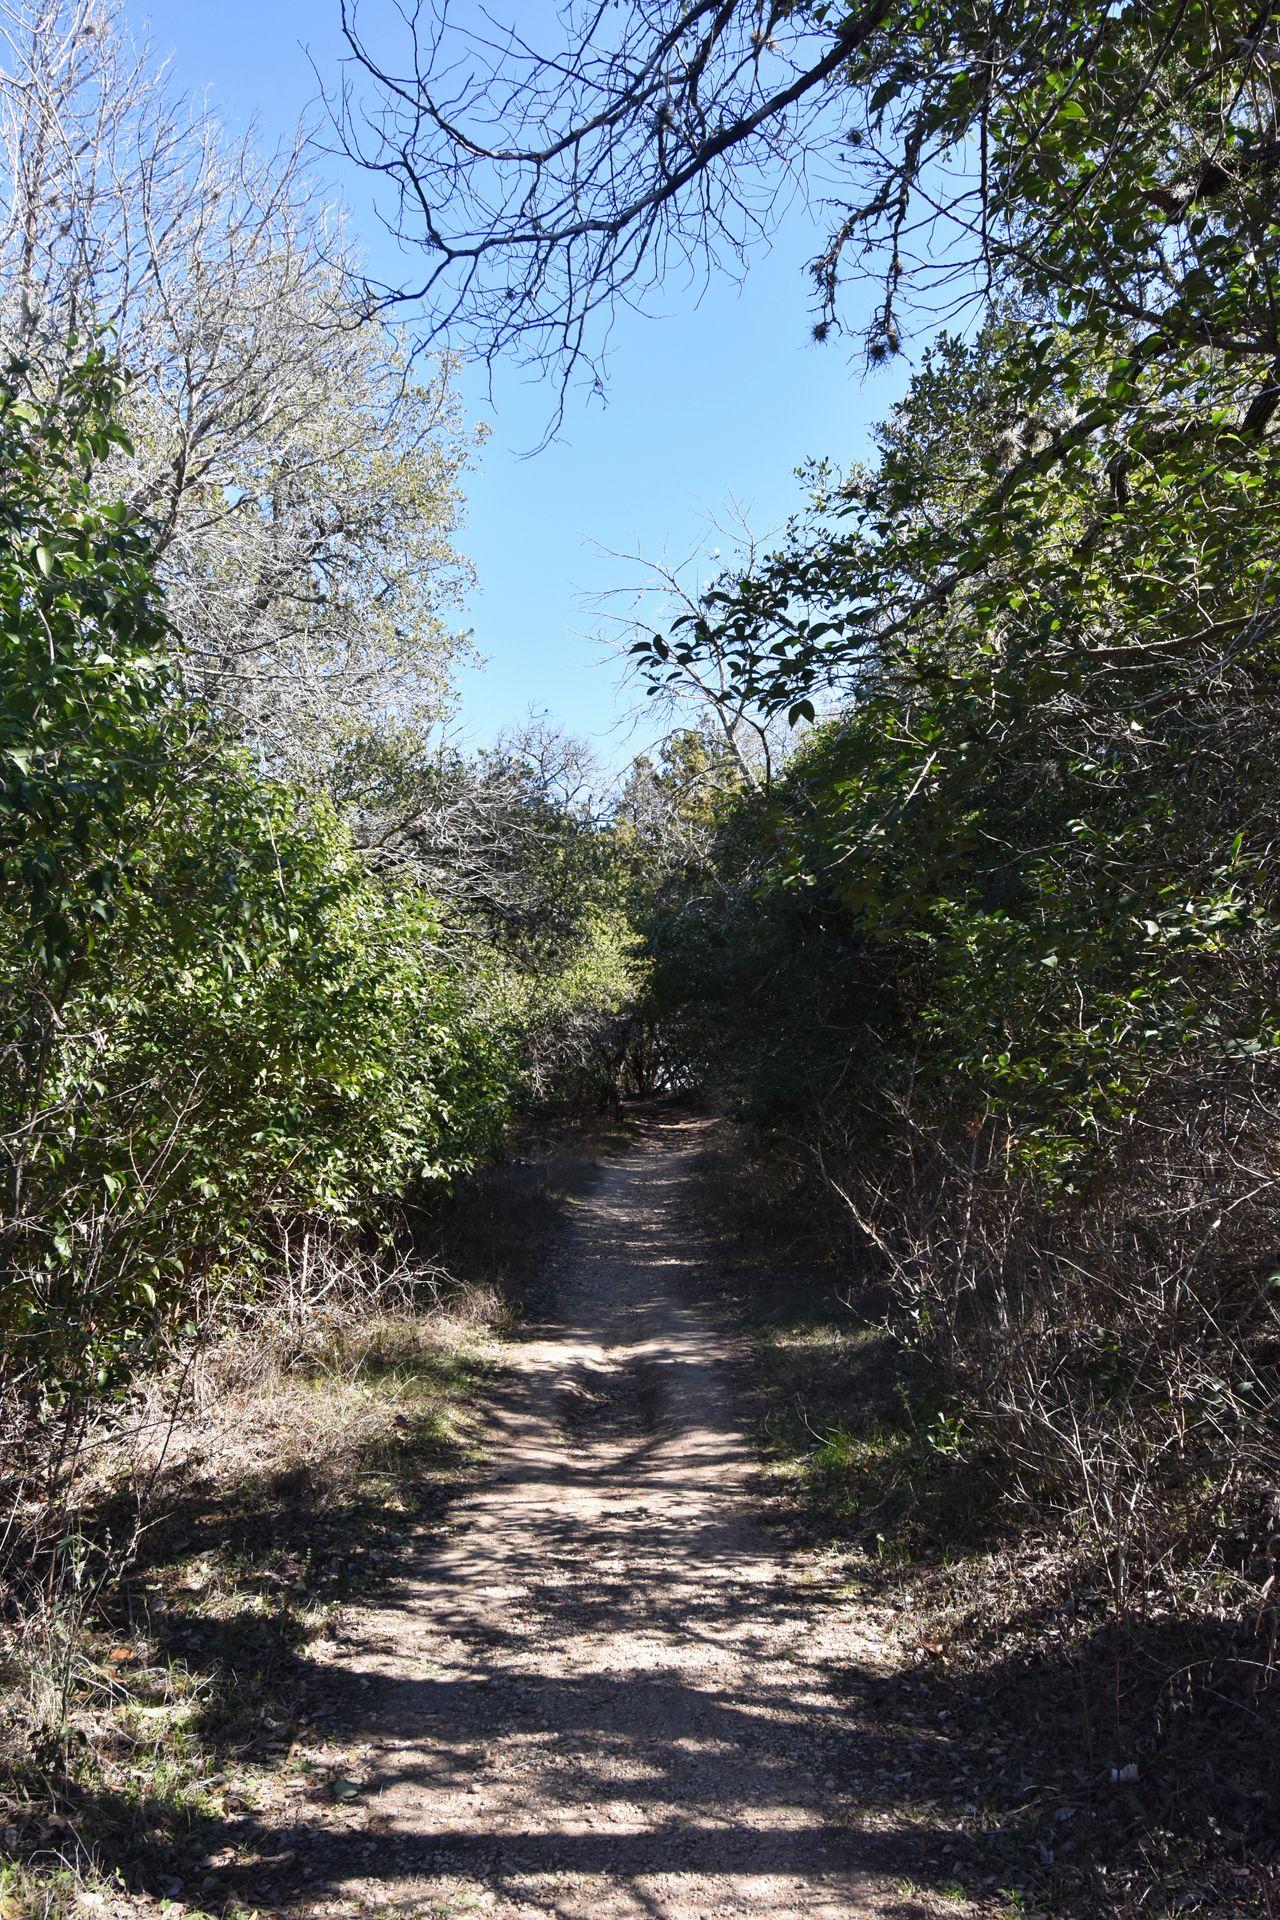 The Caswell trail in Blanco State Park.